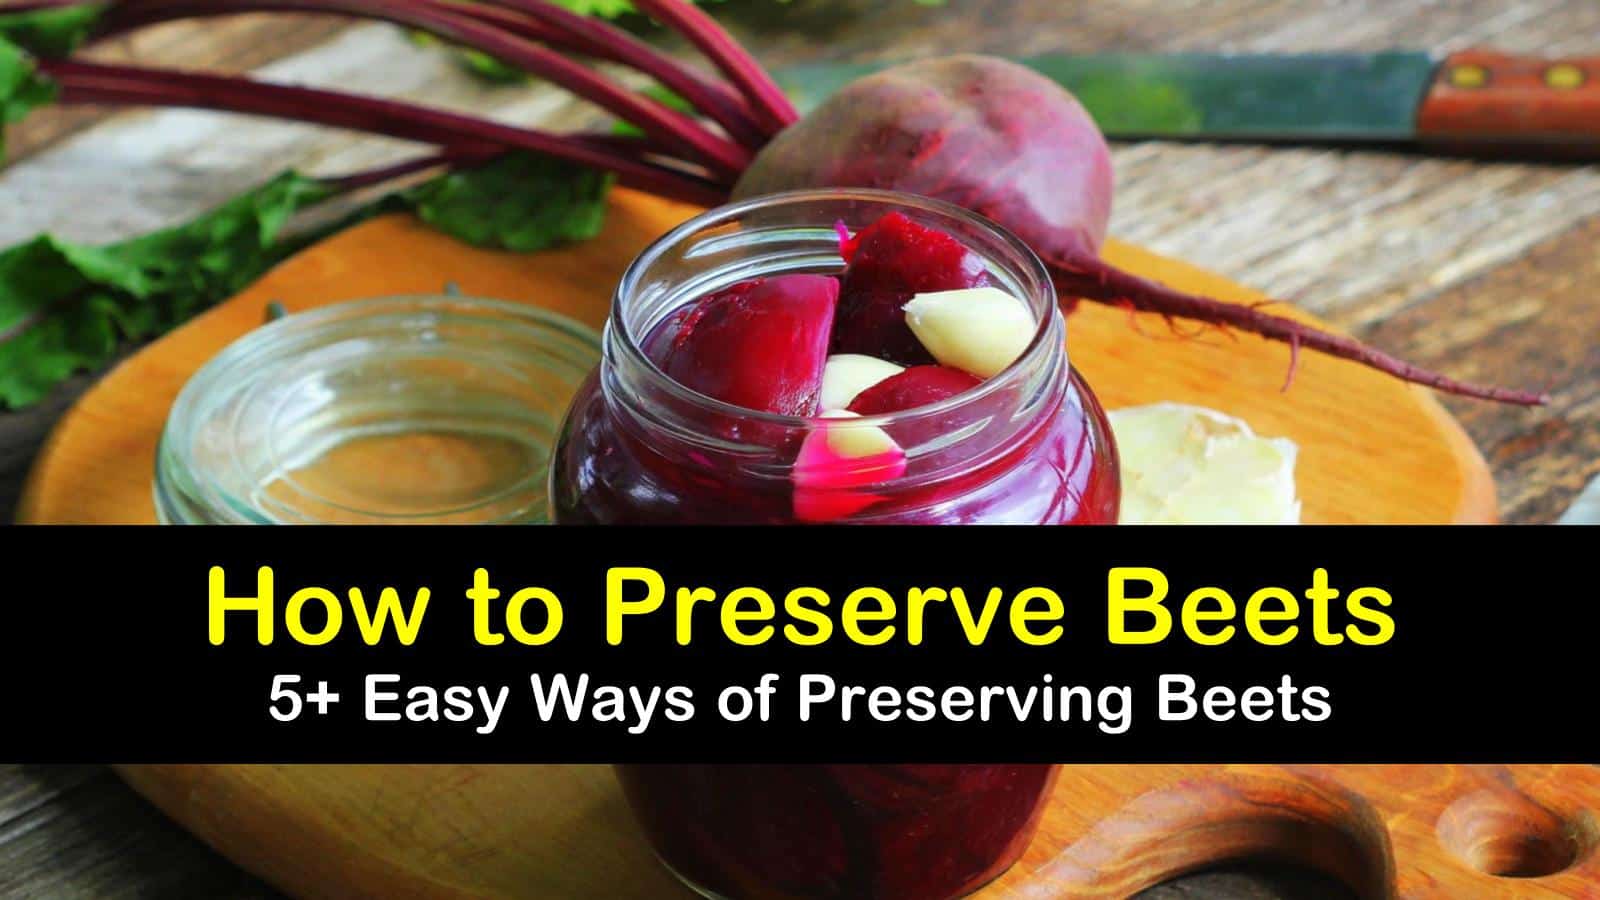 how to preserve beets titleimg1